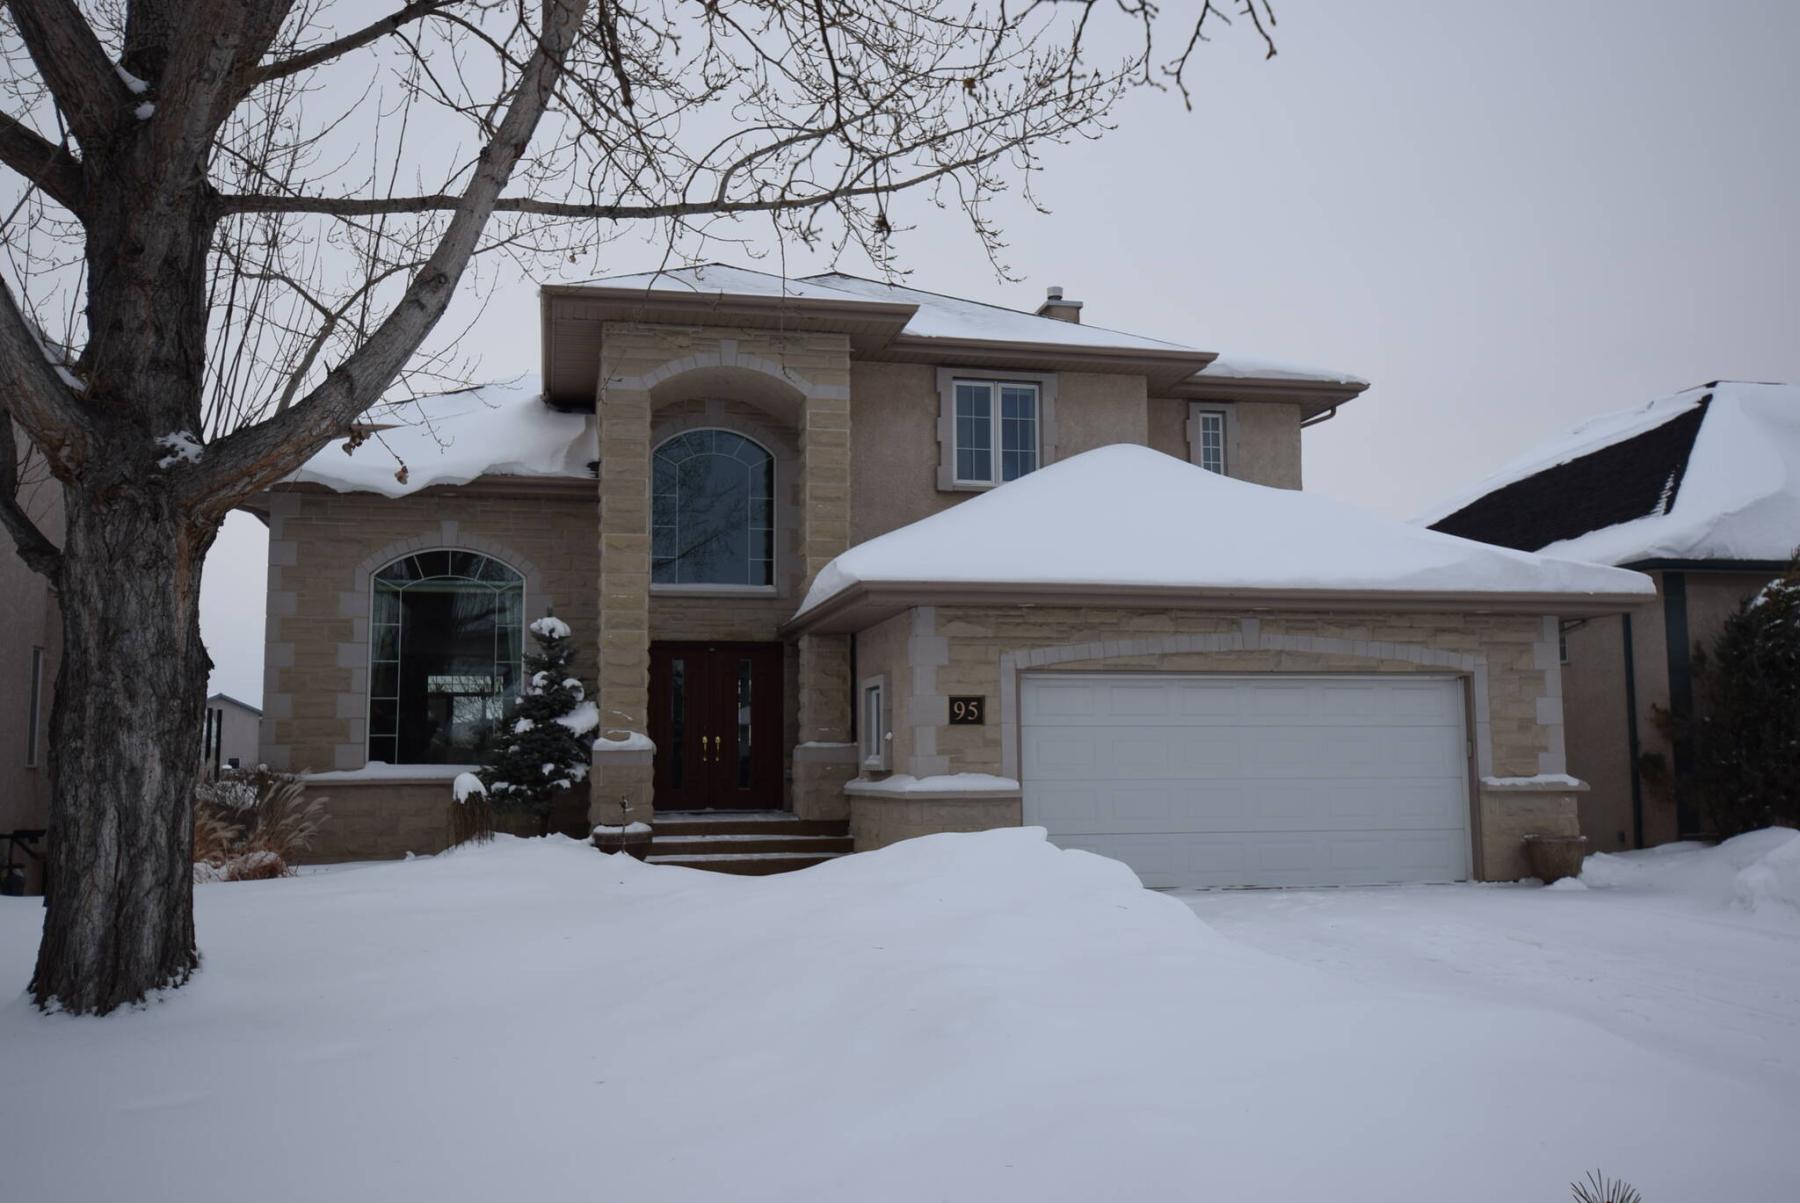  <p>Todd Lewys / Winnipeg Free Press</p>
<p>This custom masterpiece is situated on a gorgeous lakefront lot and features a grand yet warm interior design.</p> 